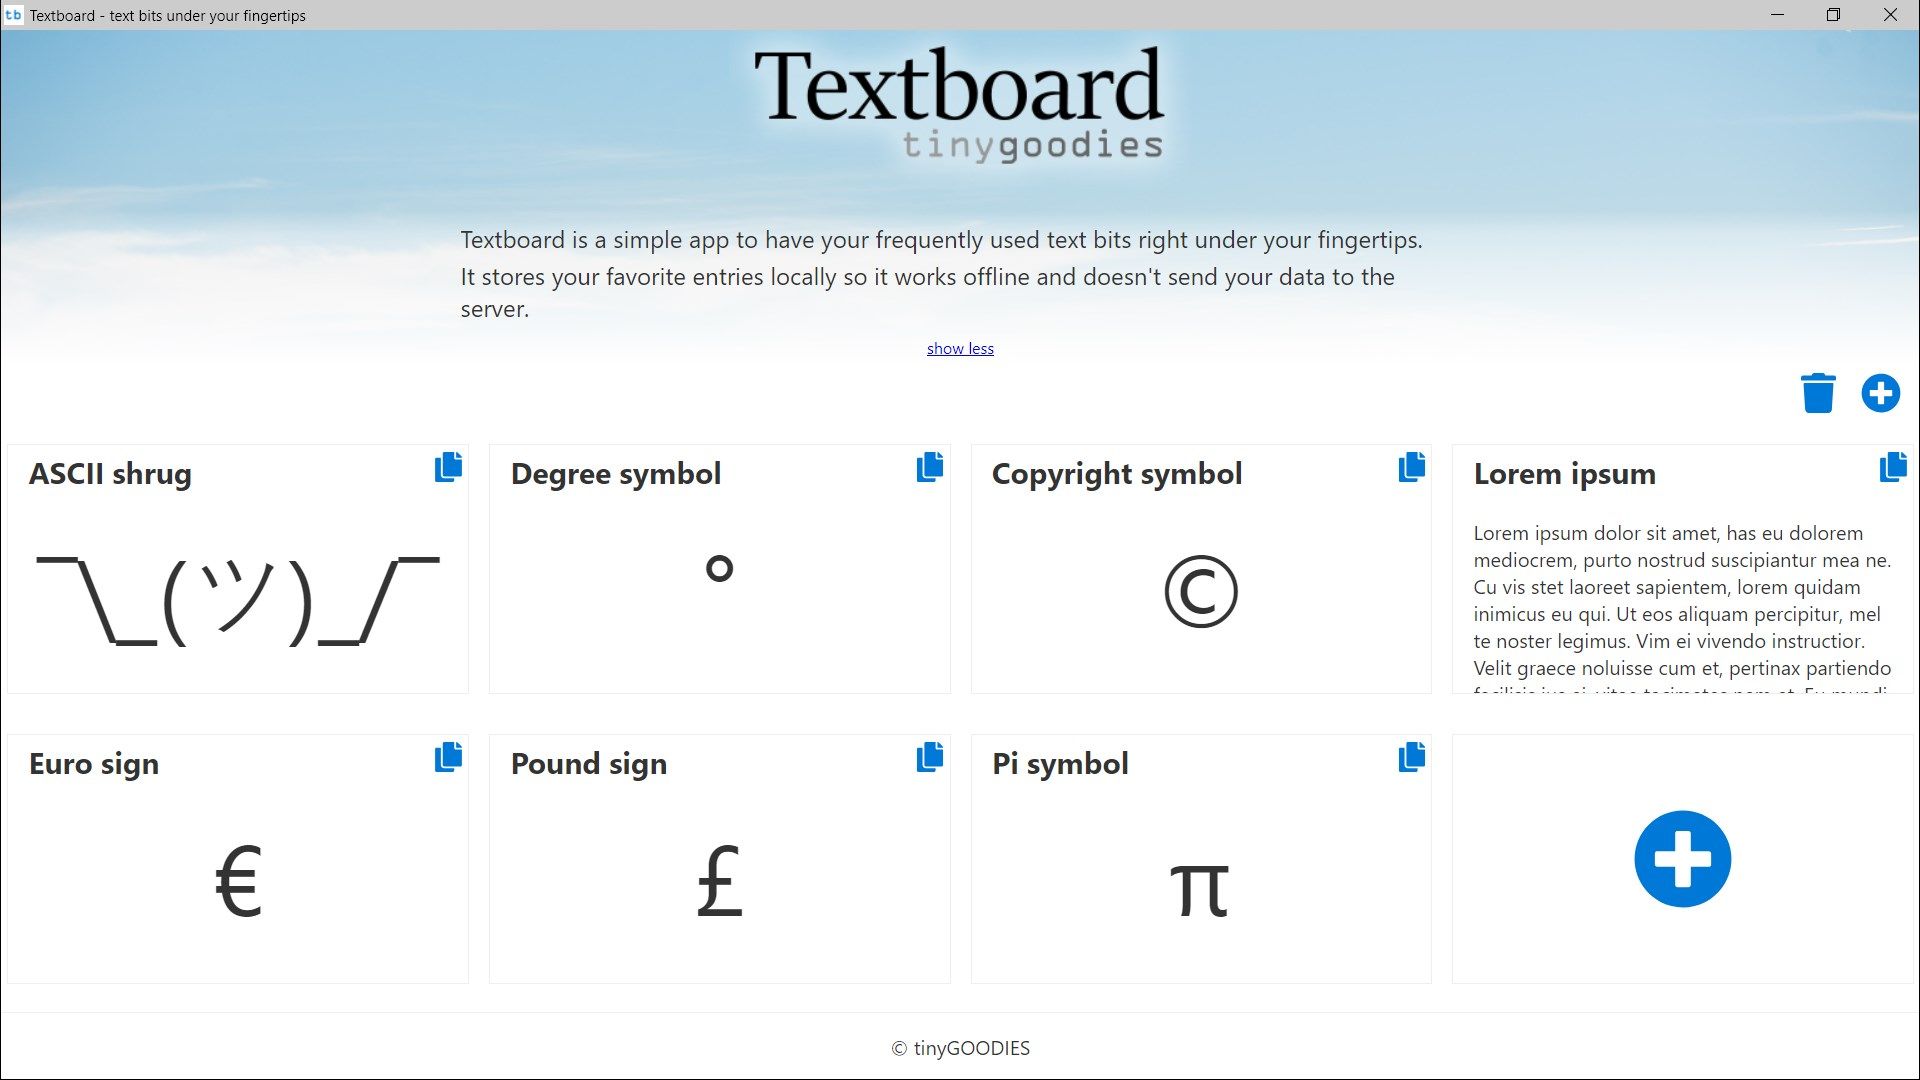 Have symbols and text bits at your fingertips